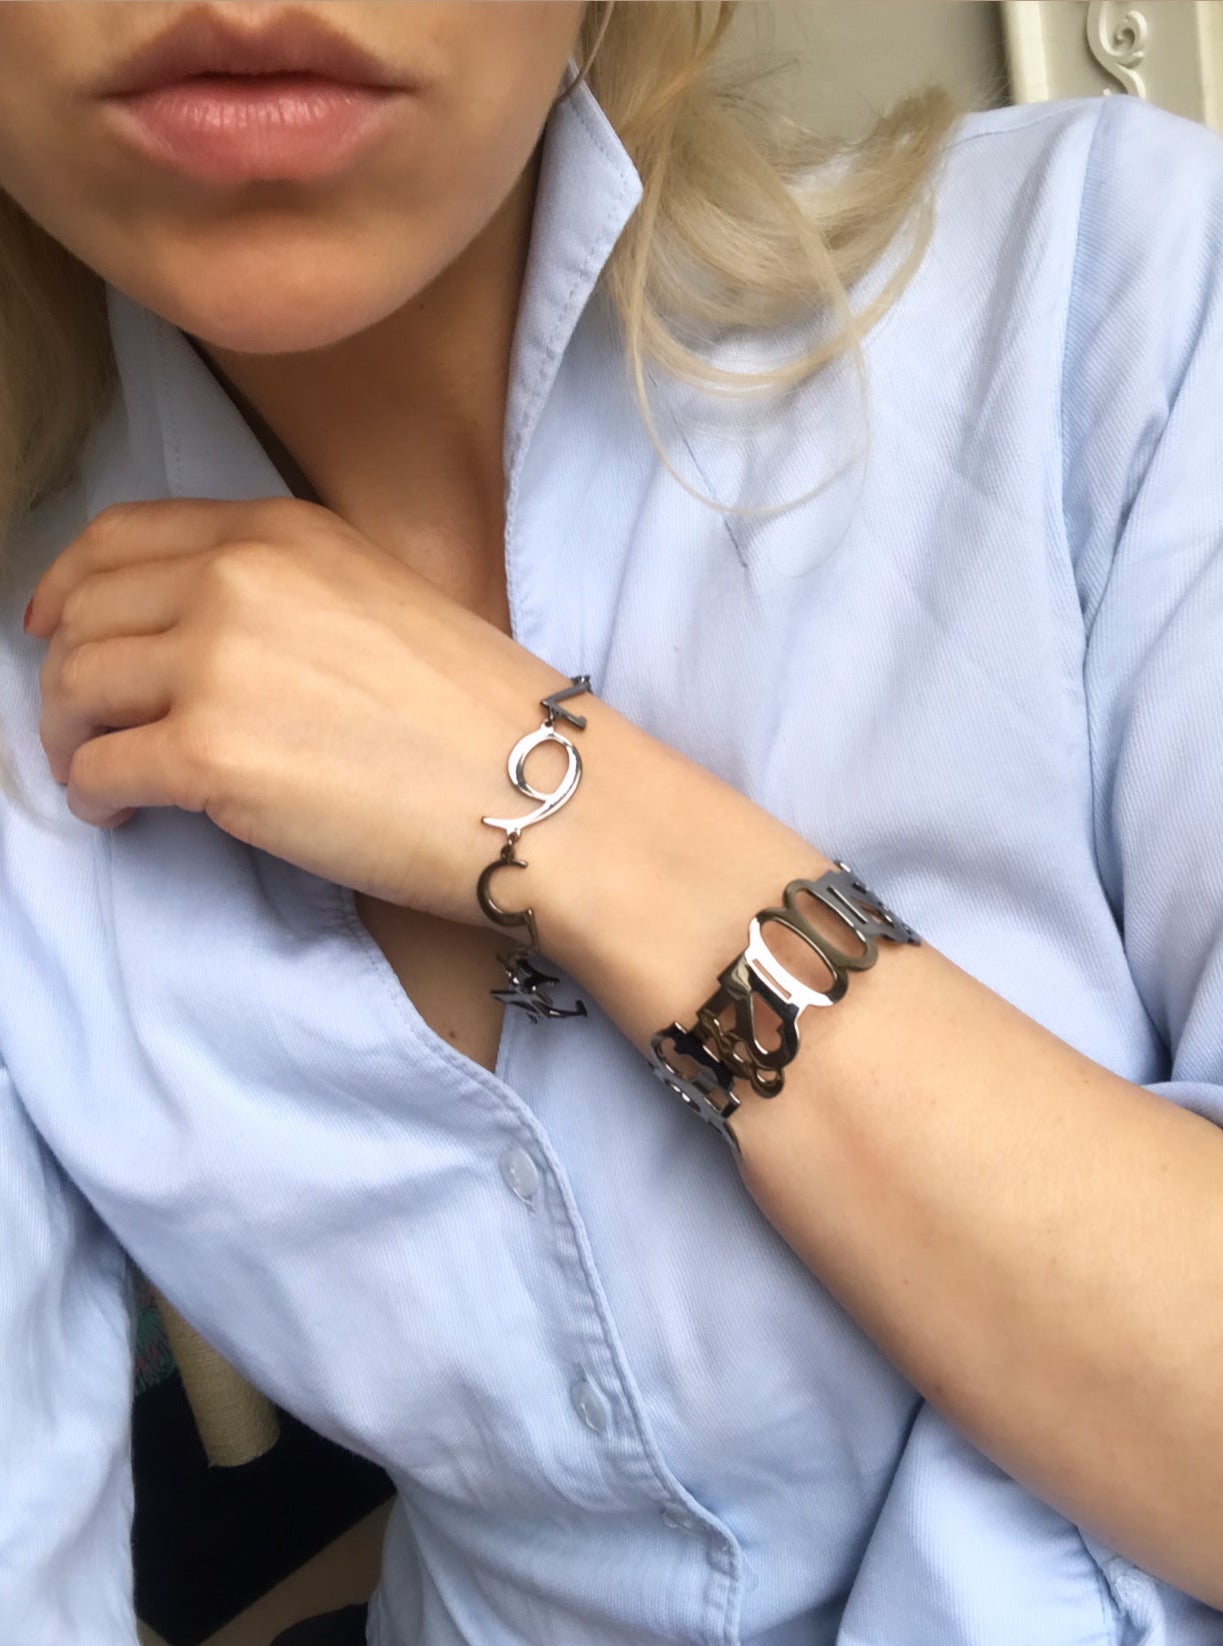 Stunning bracelet in 925 oxidised silver from iconic Numbers collection. Gentle on the arm, the bracelet features perfectly elaborated 1 to 9 design. Material: 925 silver, oxidised 